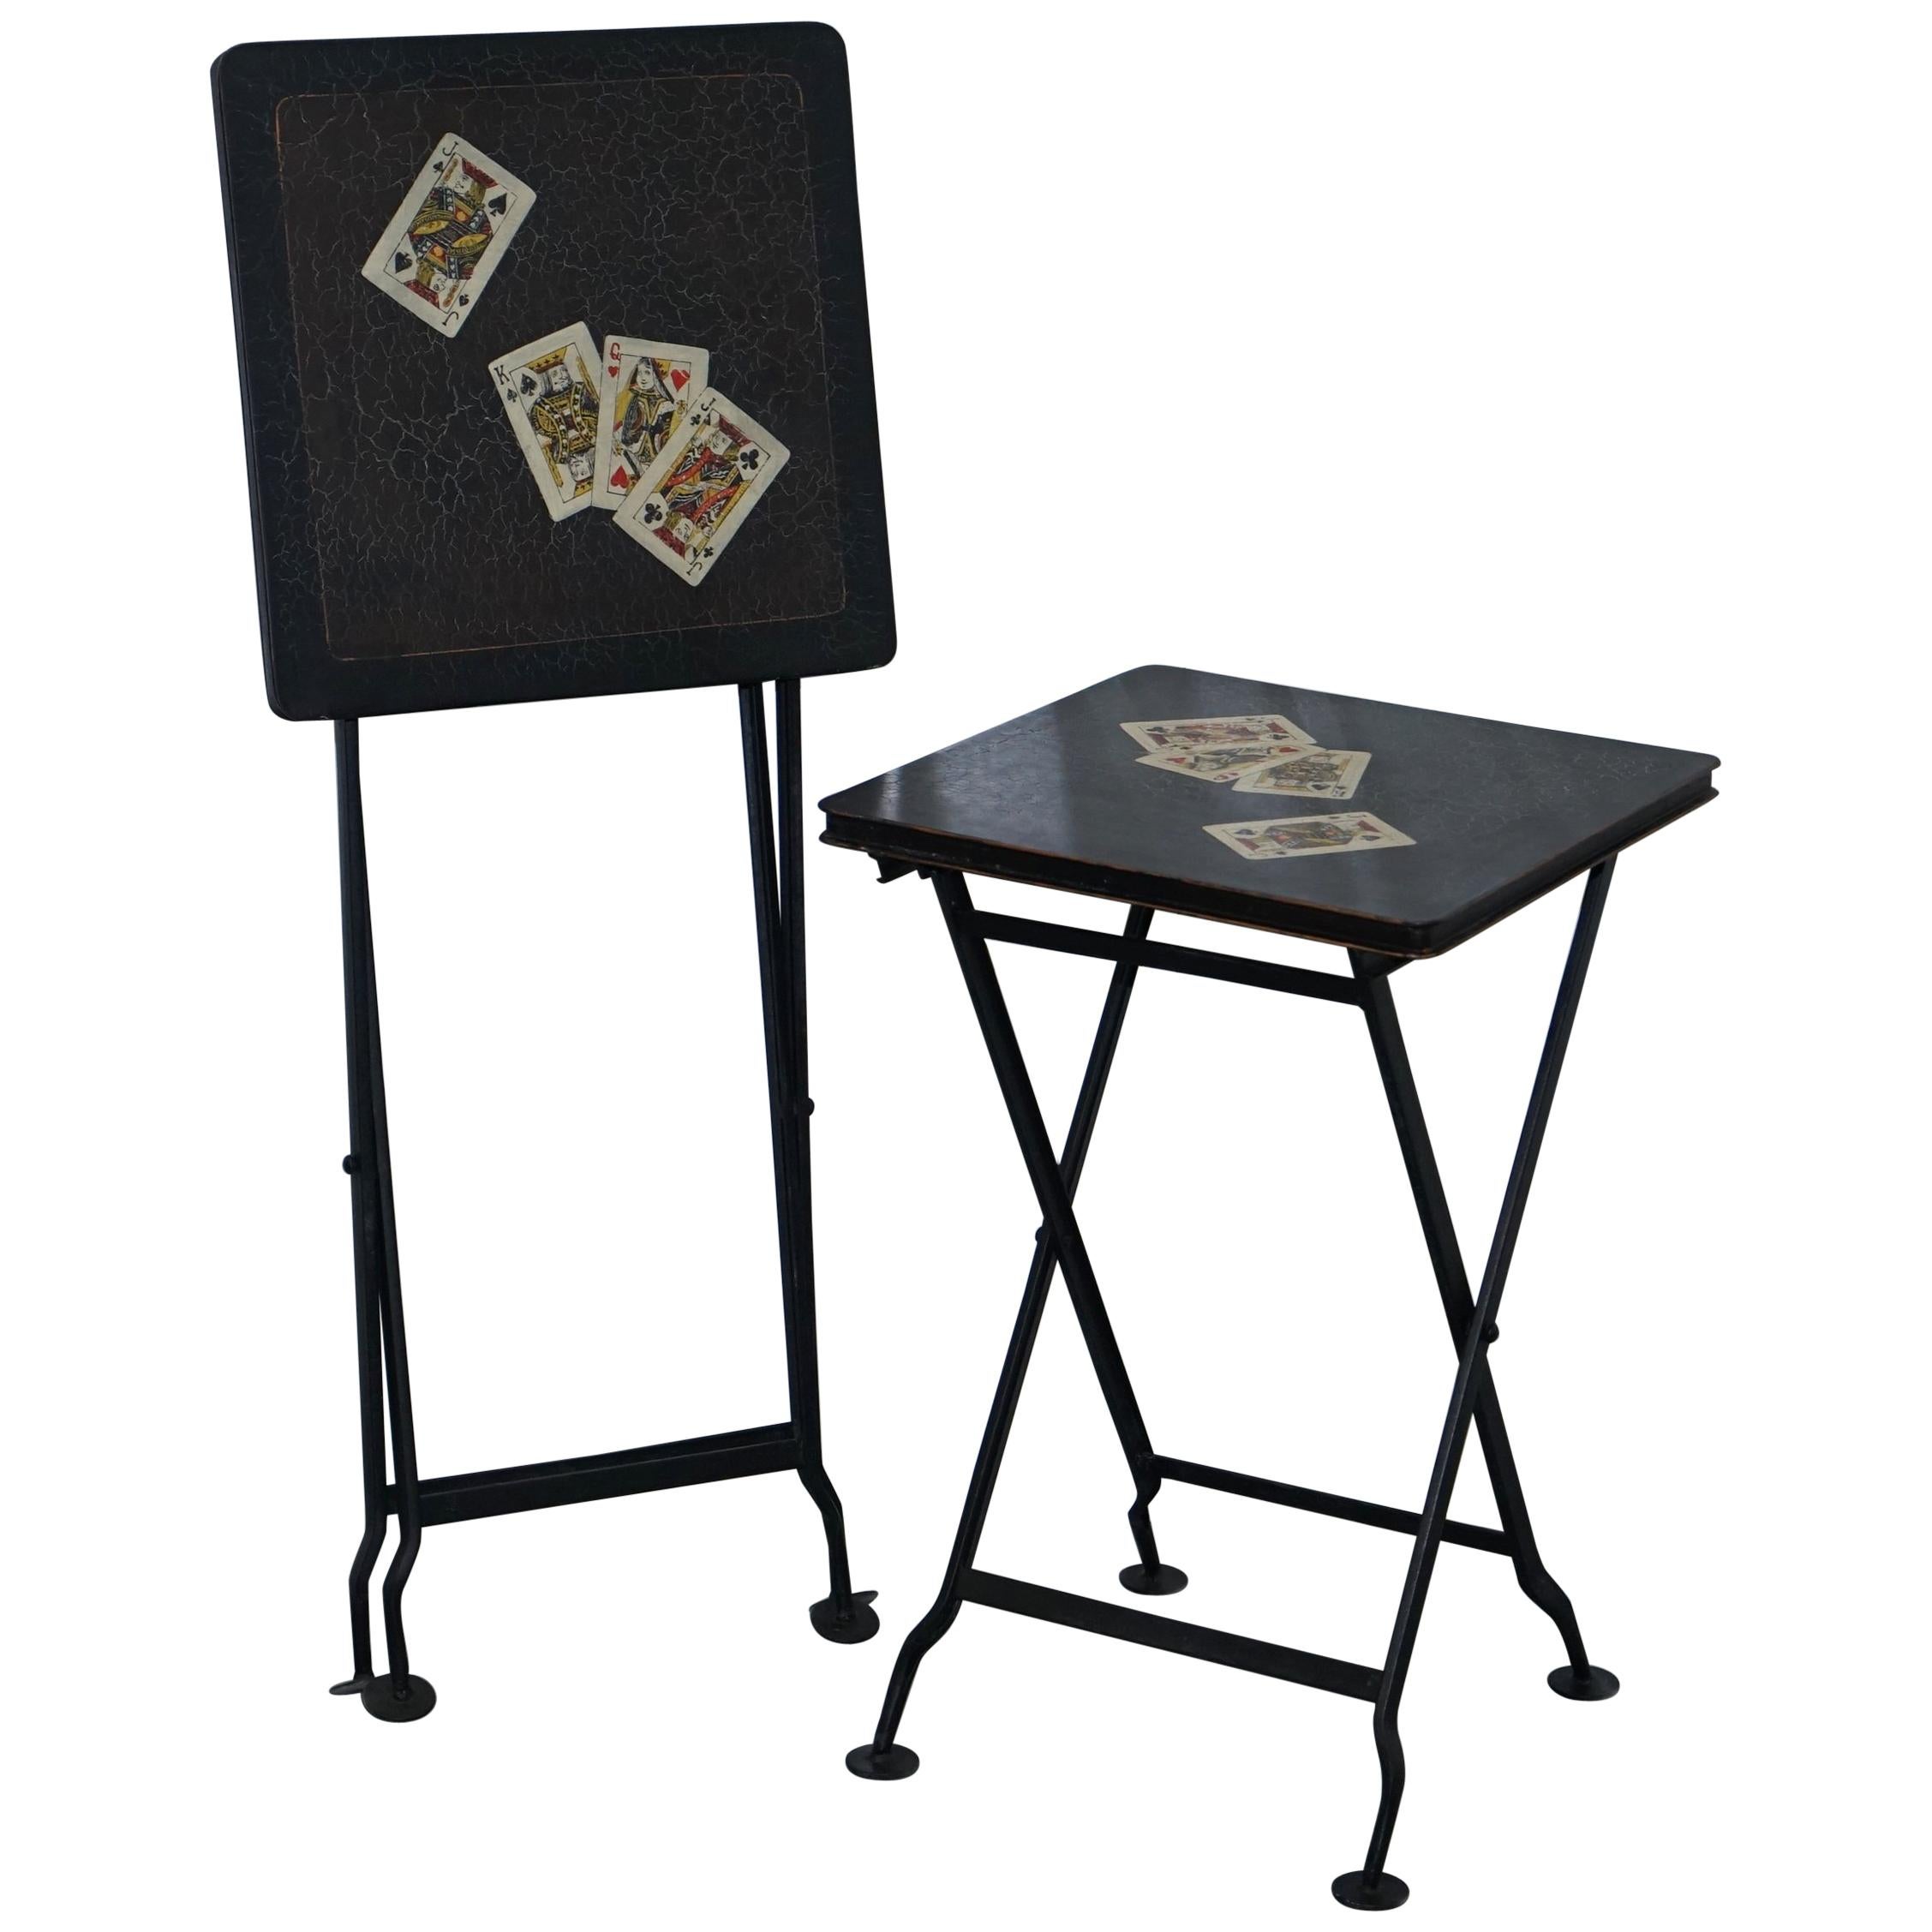 Stunning Rare Pair of Vintage Hand Painted Folding Metal Card Games Side Tables